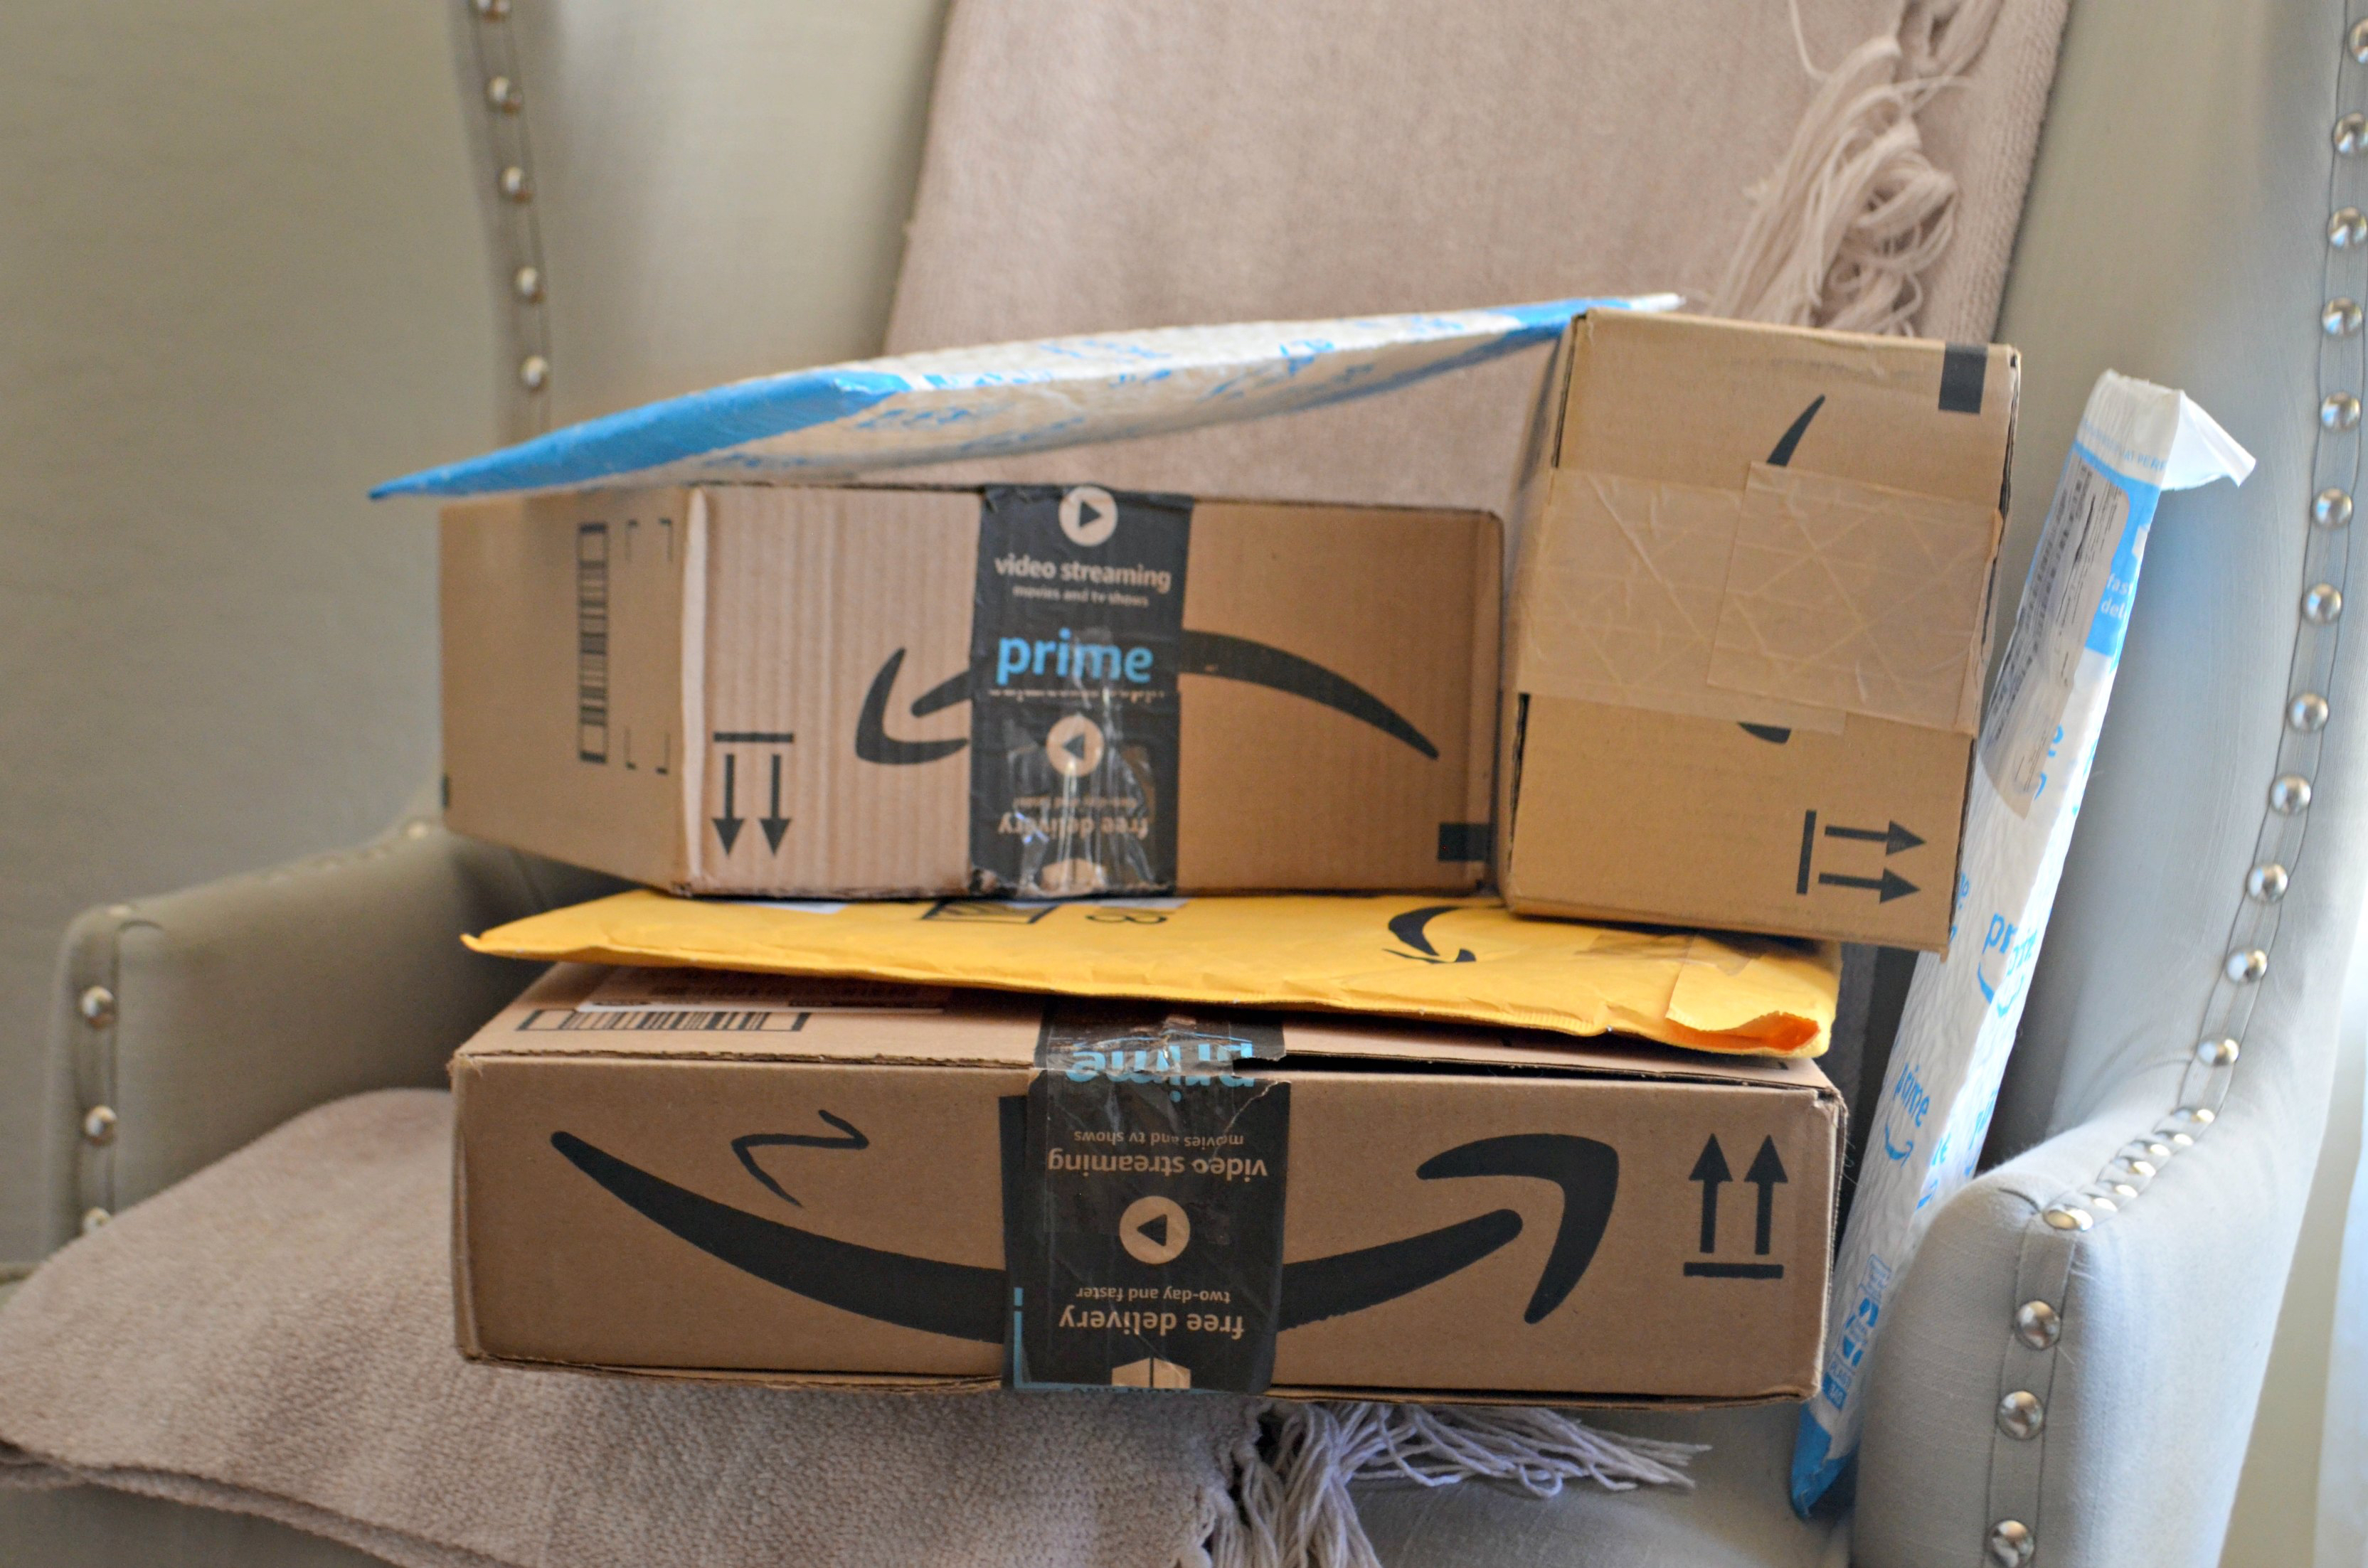 amazon prime day 2018 – packages stacked on a chair